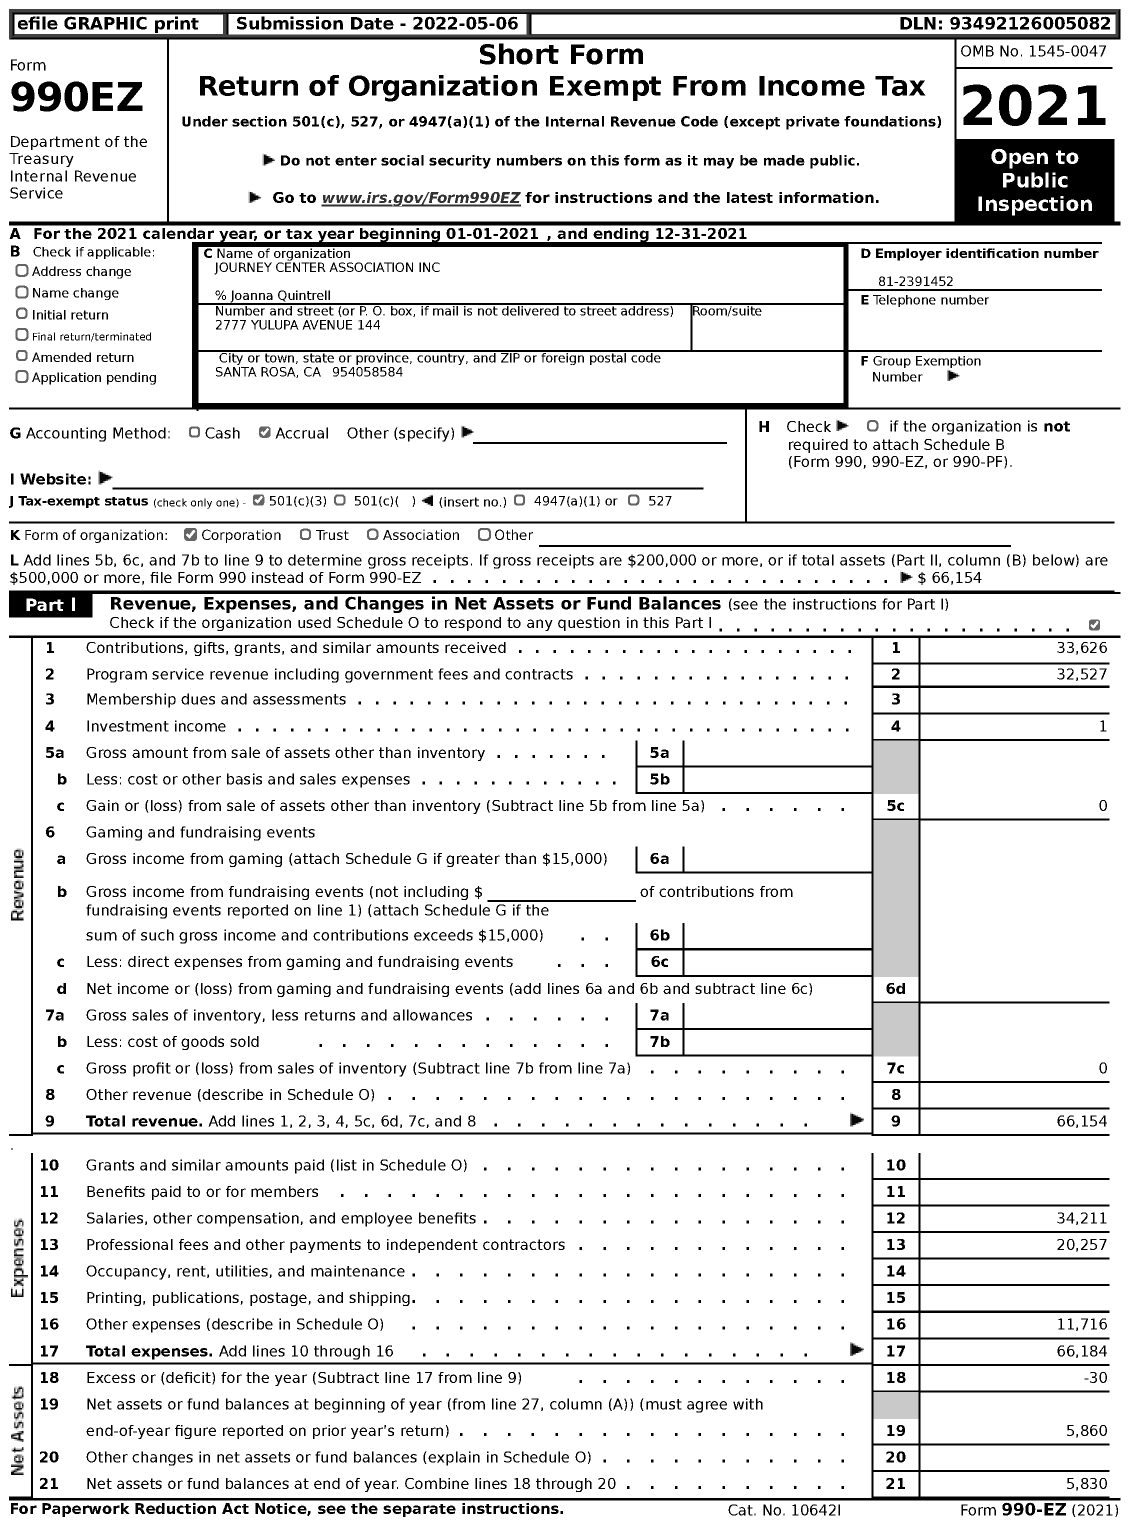 Image of first page of 2021 Form 990EZ for Journey Center Association